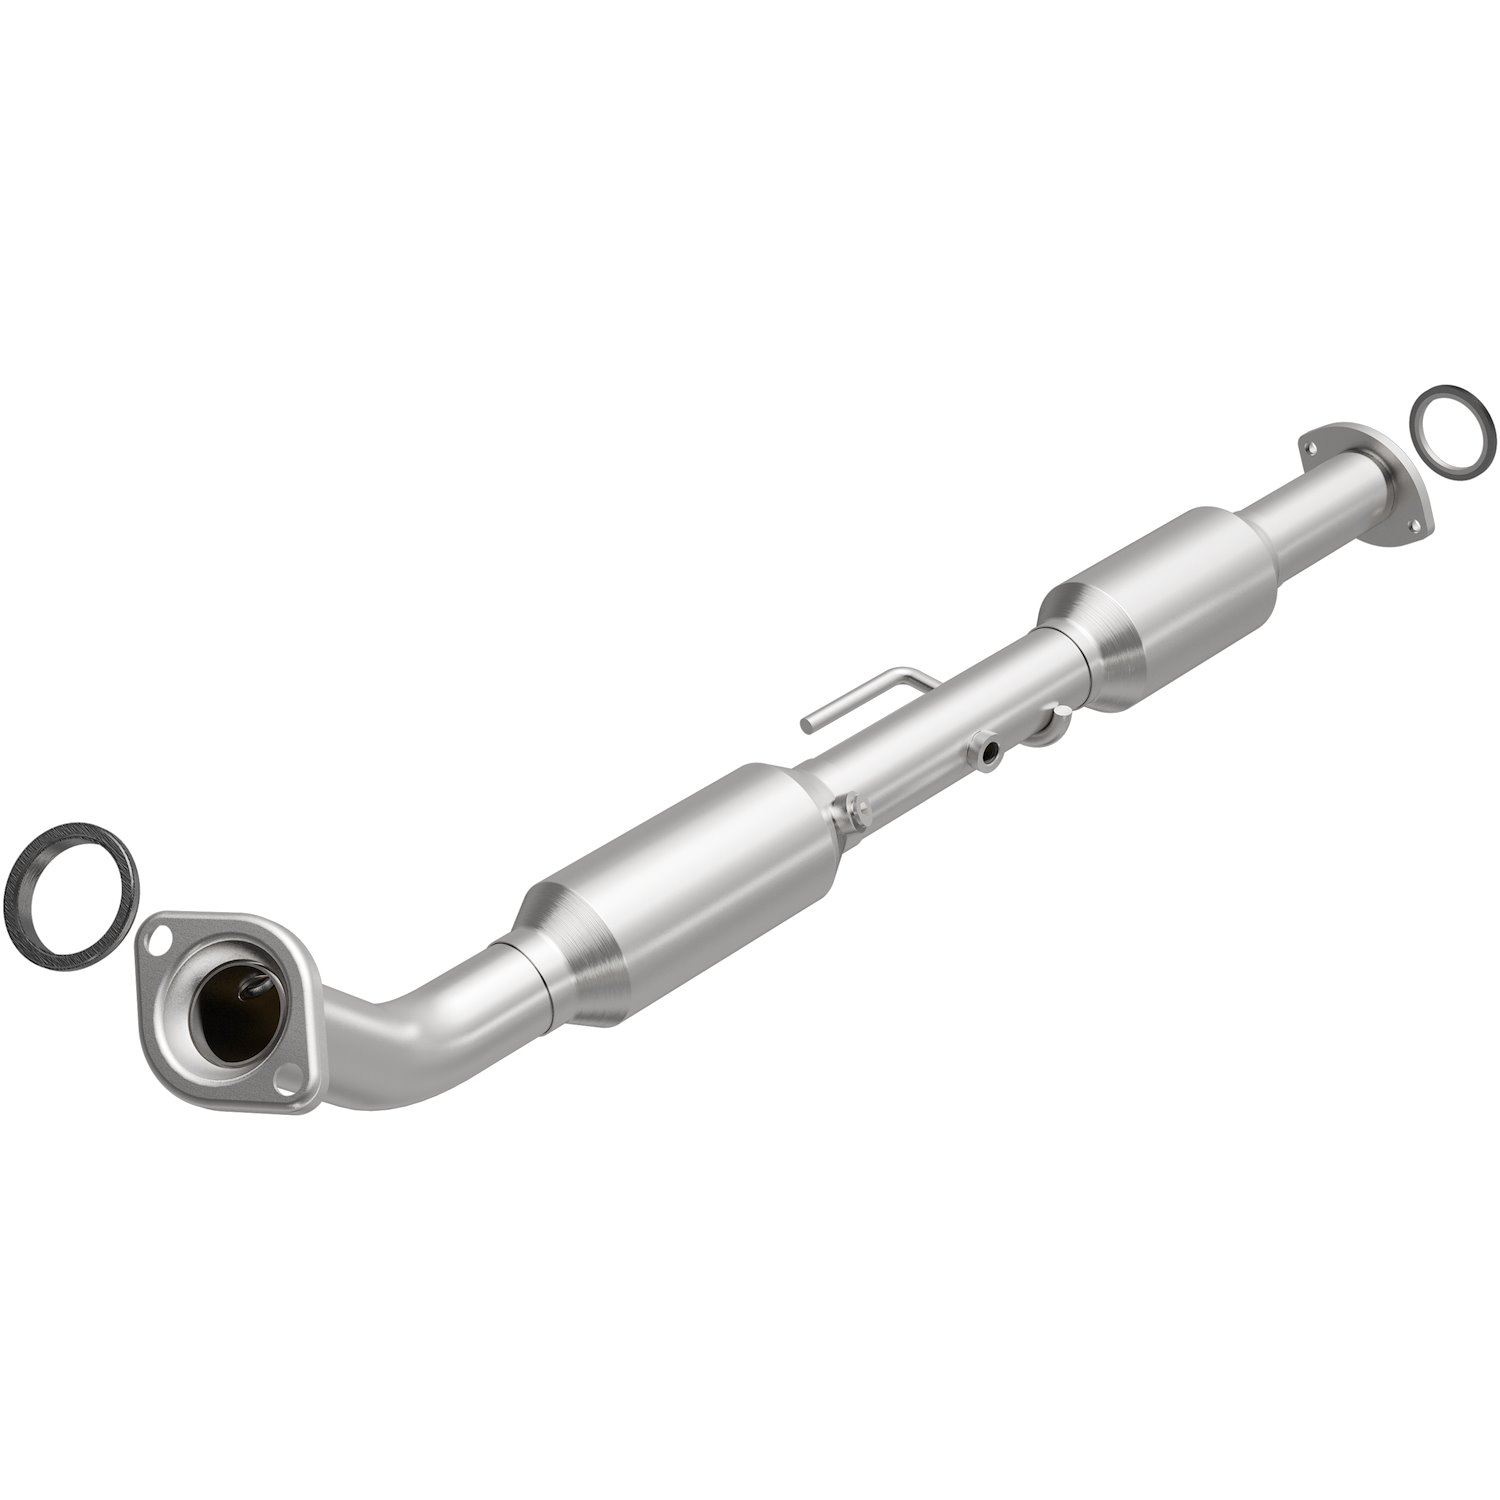 2013-2015 Toyota Tacoma California Grade CARB Compliant Direct-Fit Catalytic Converter